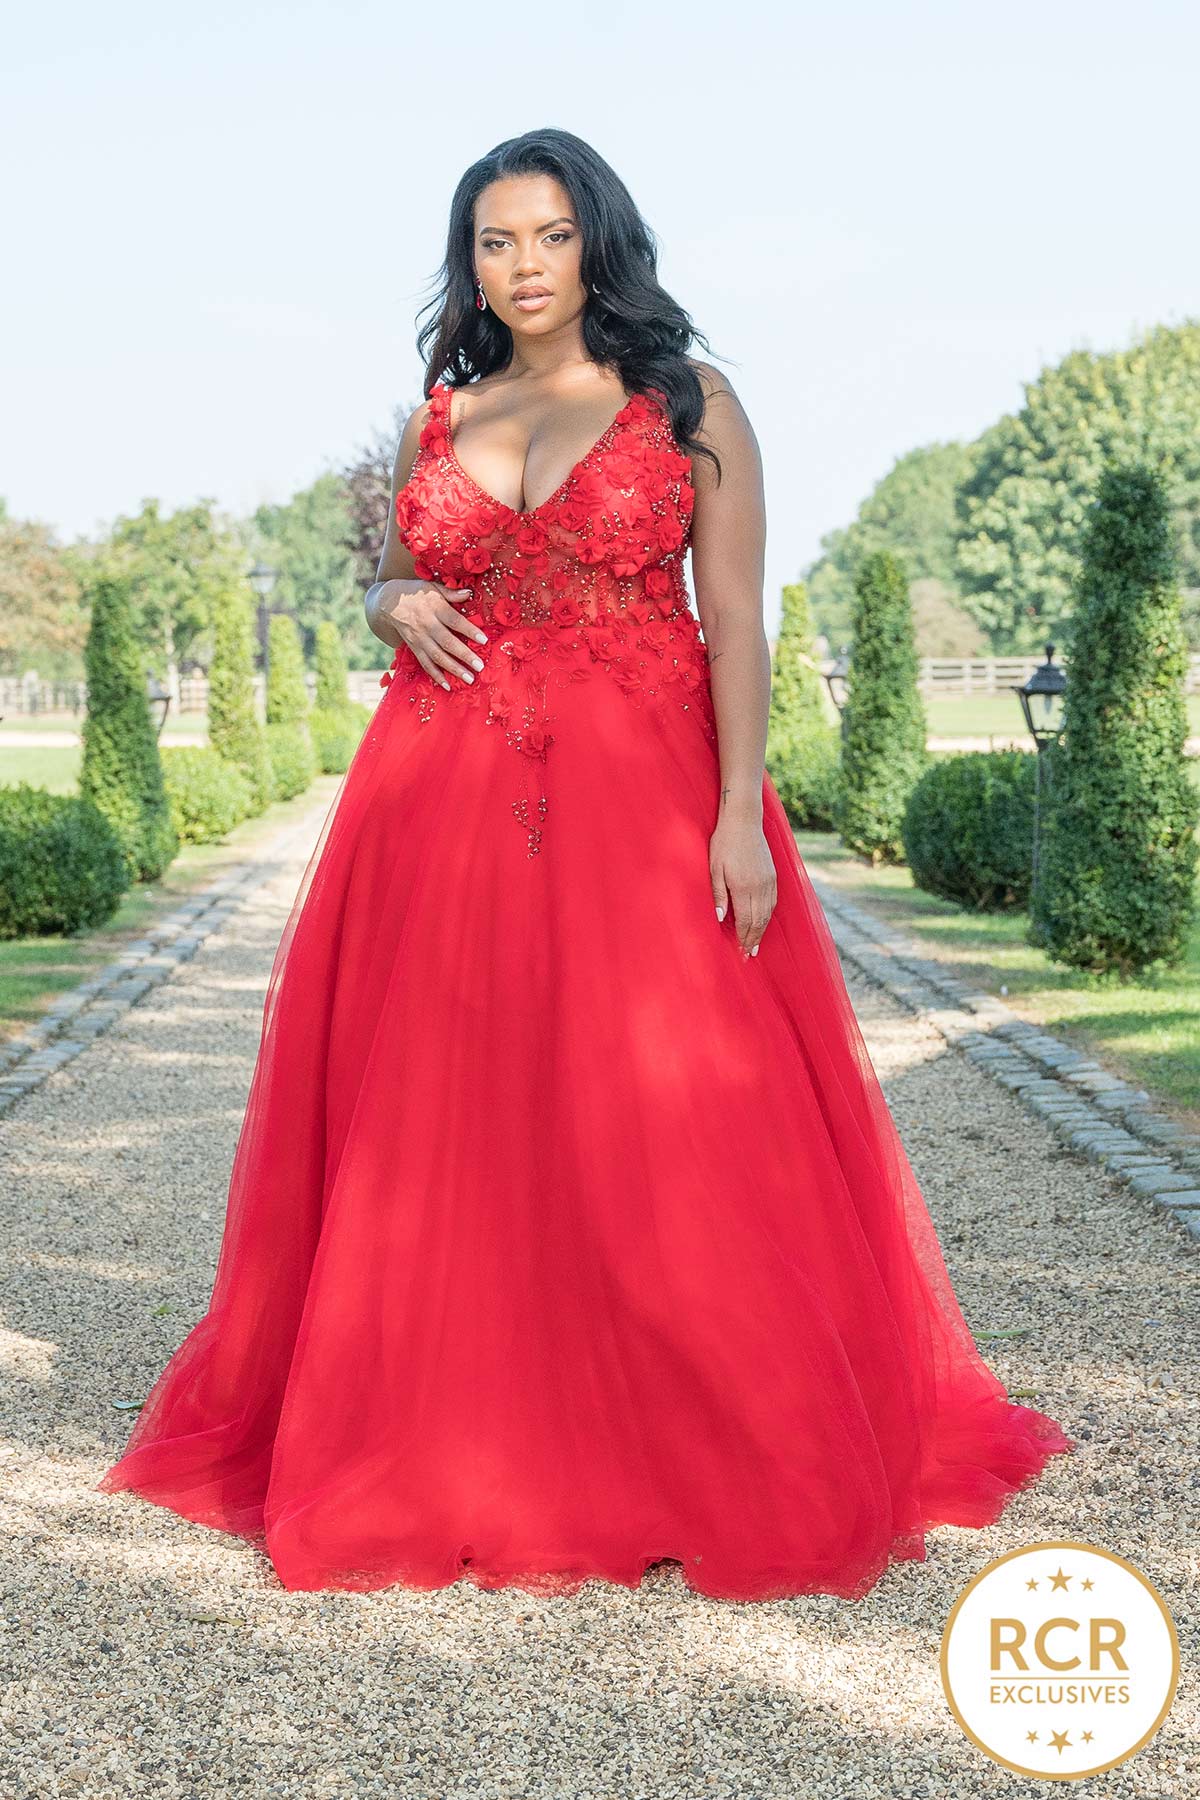 Red Princess Ball Gown Prom Dress – Sultan Dress